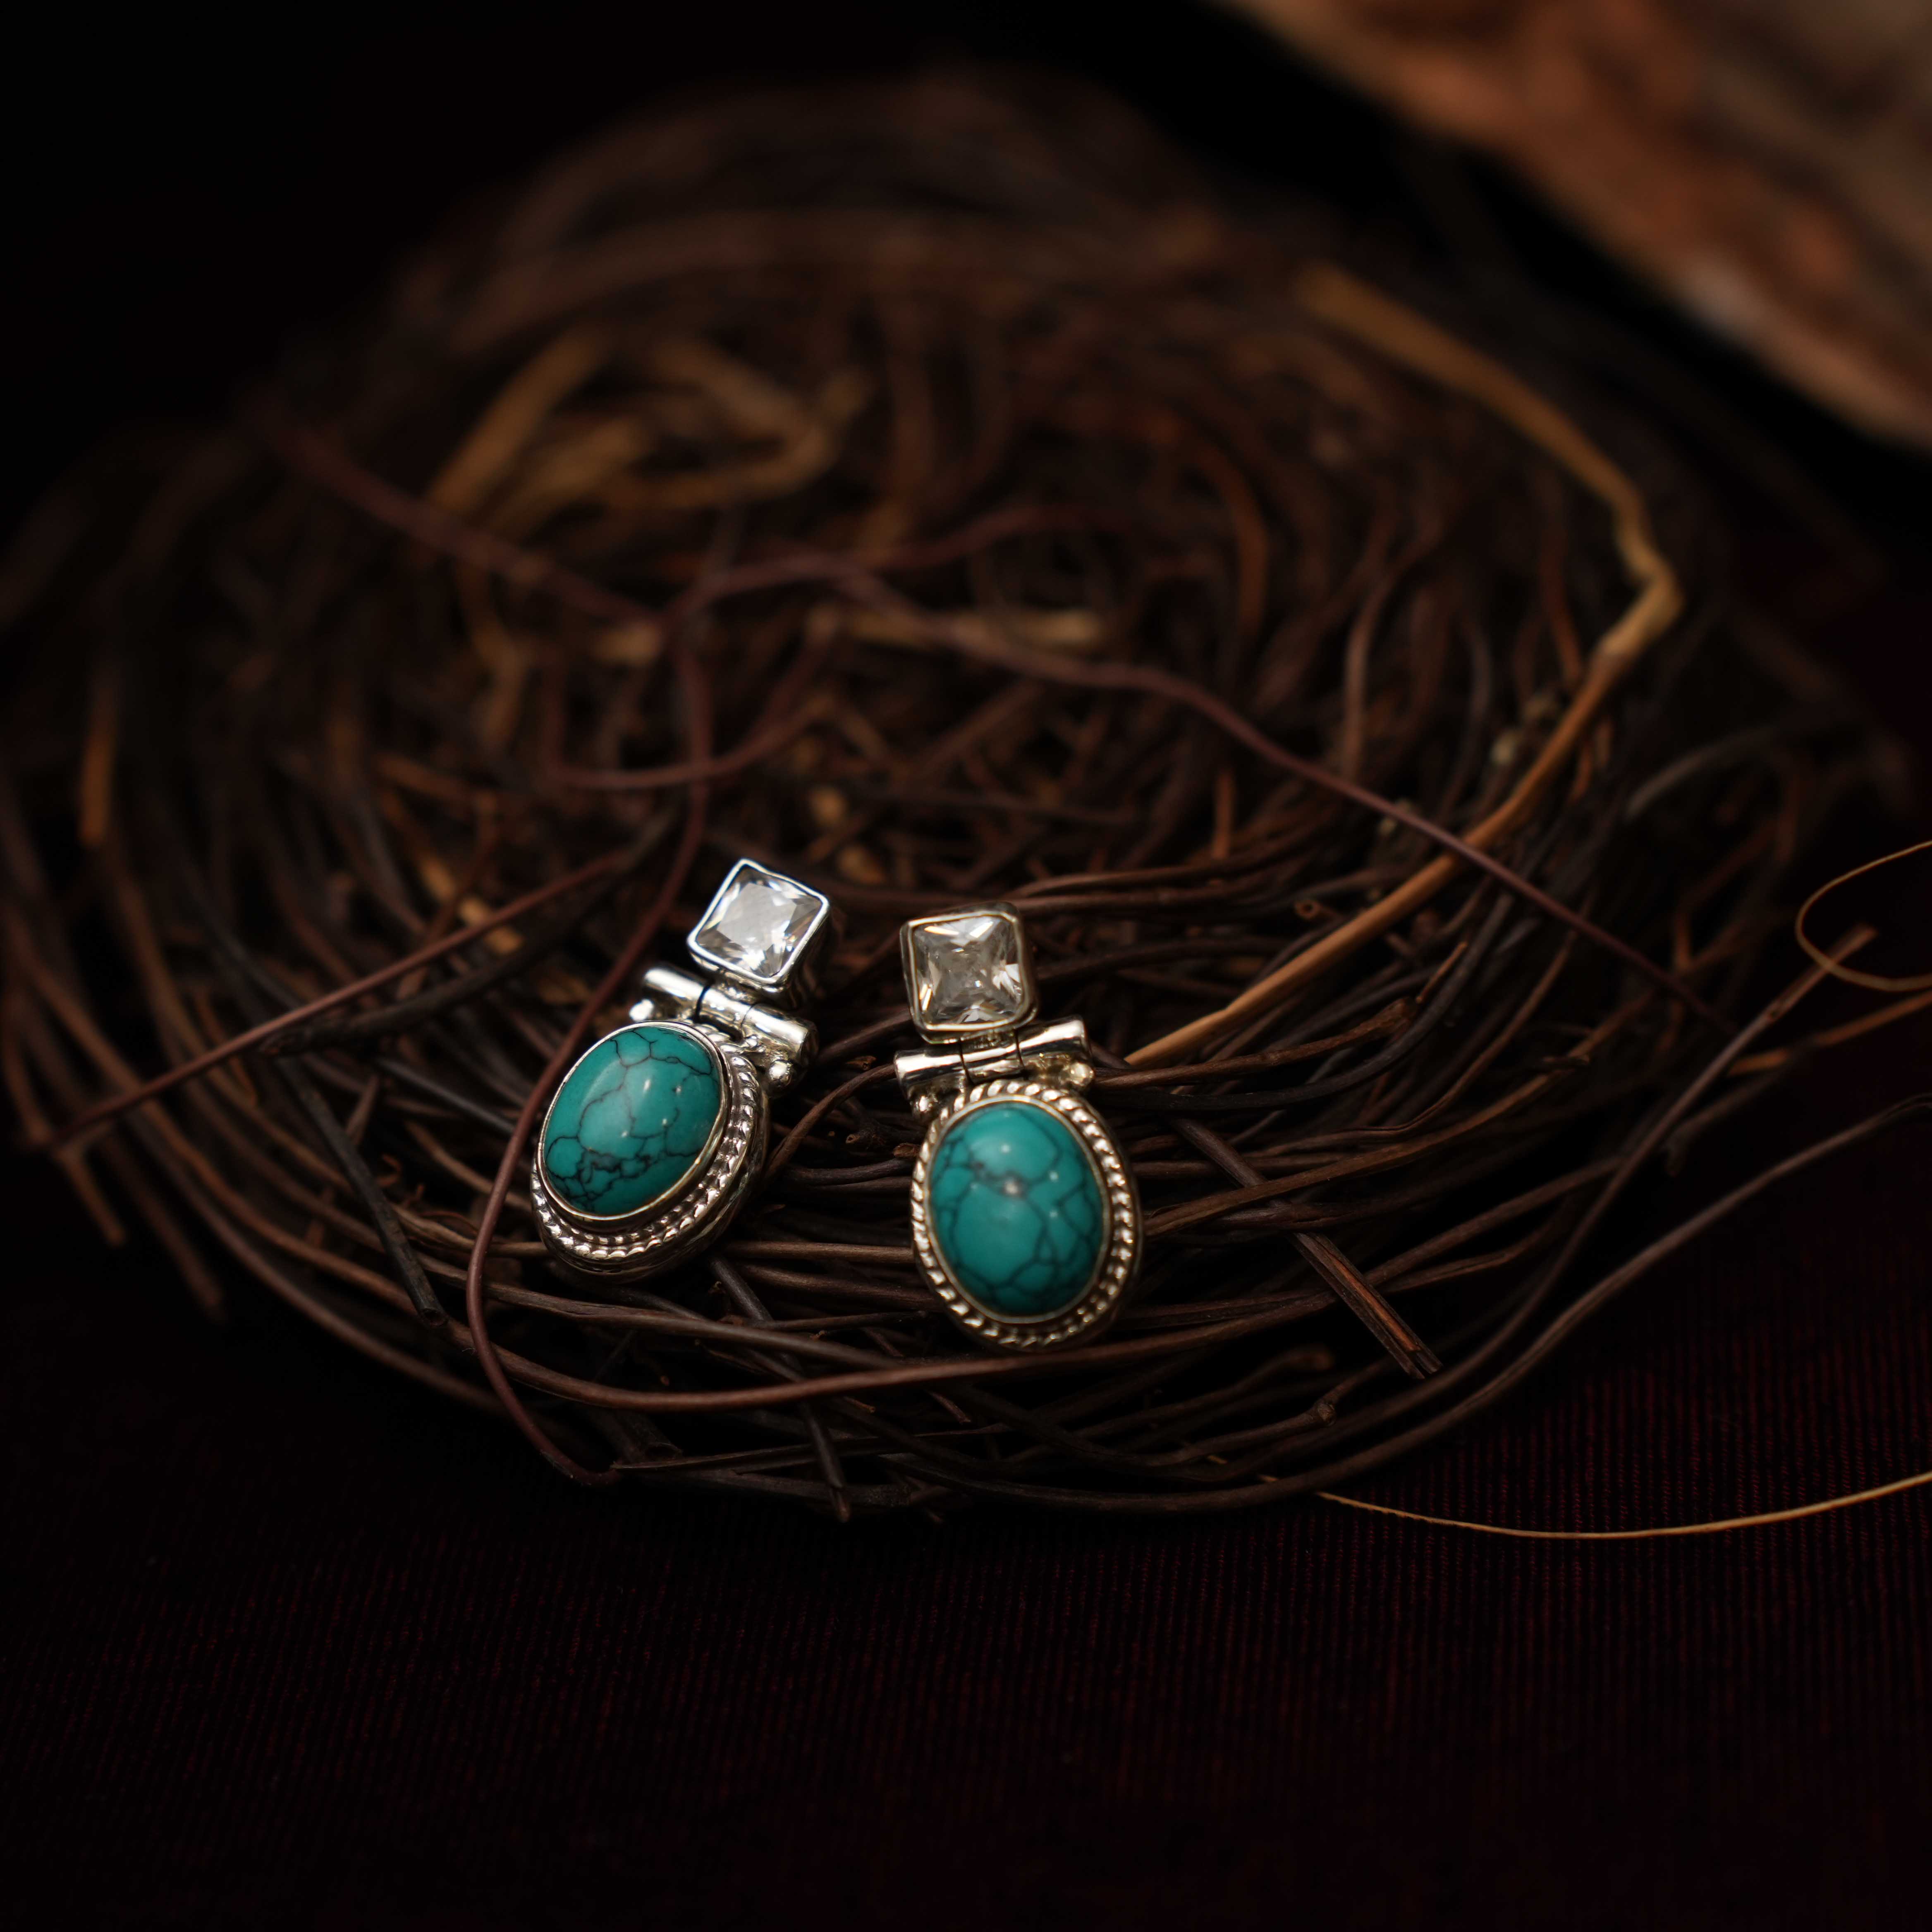 Radhi 925 Oxidized Silver Earrings - Turquoise